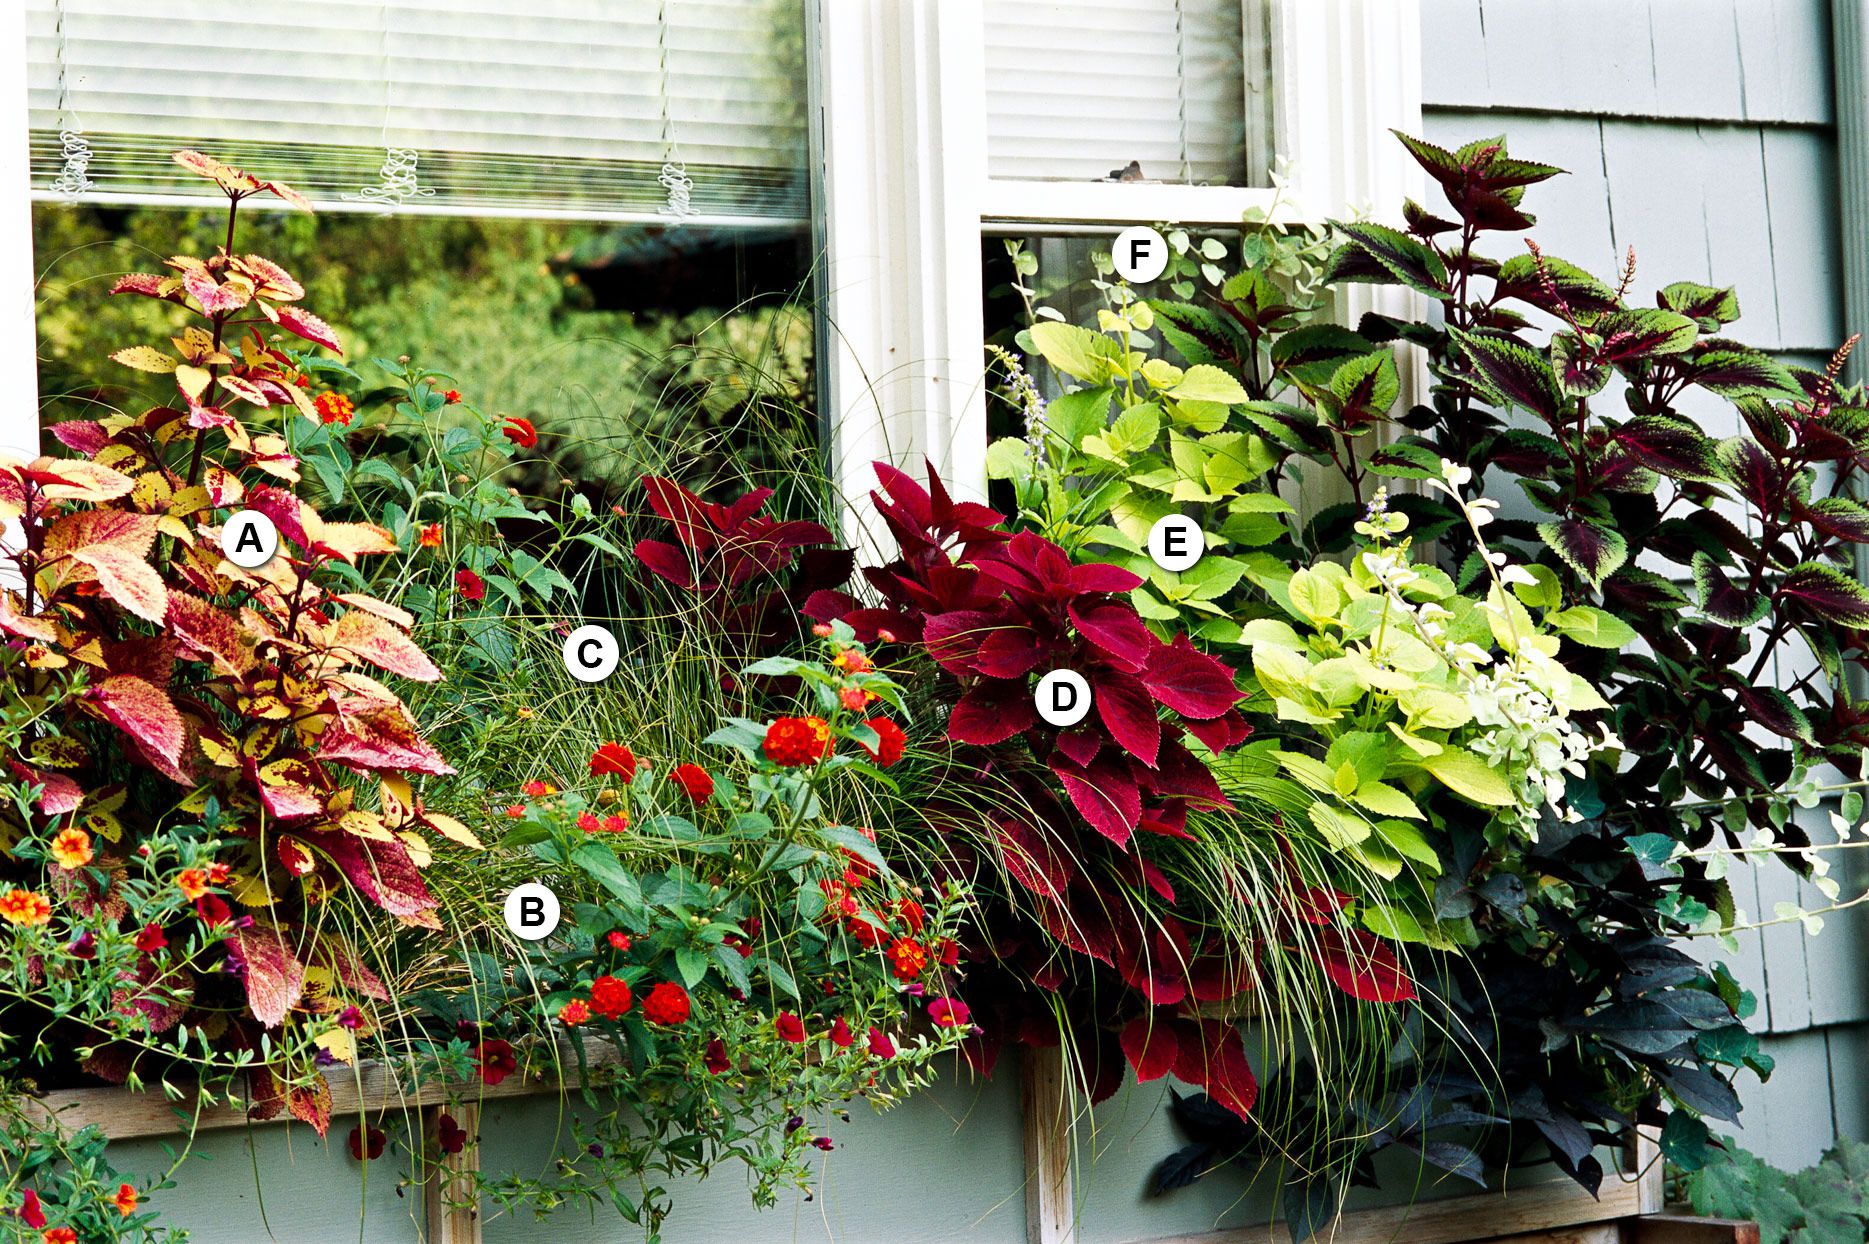 Spring window box ideas – 8 looks for an instant front yard glow-up